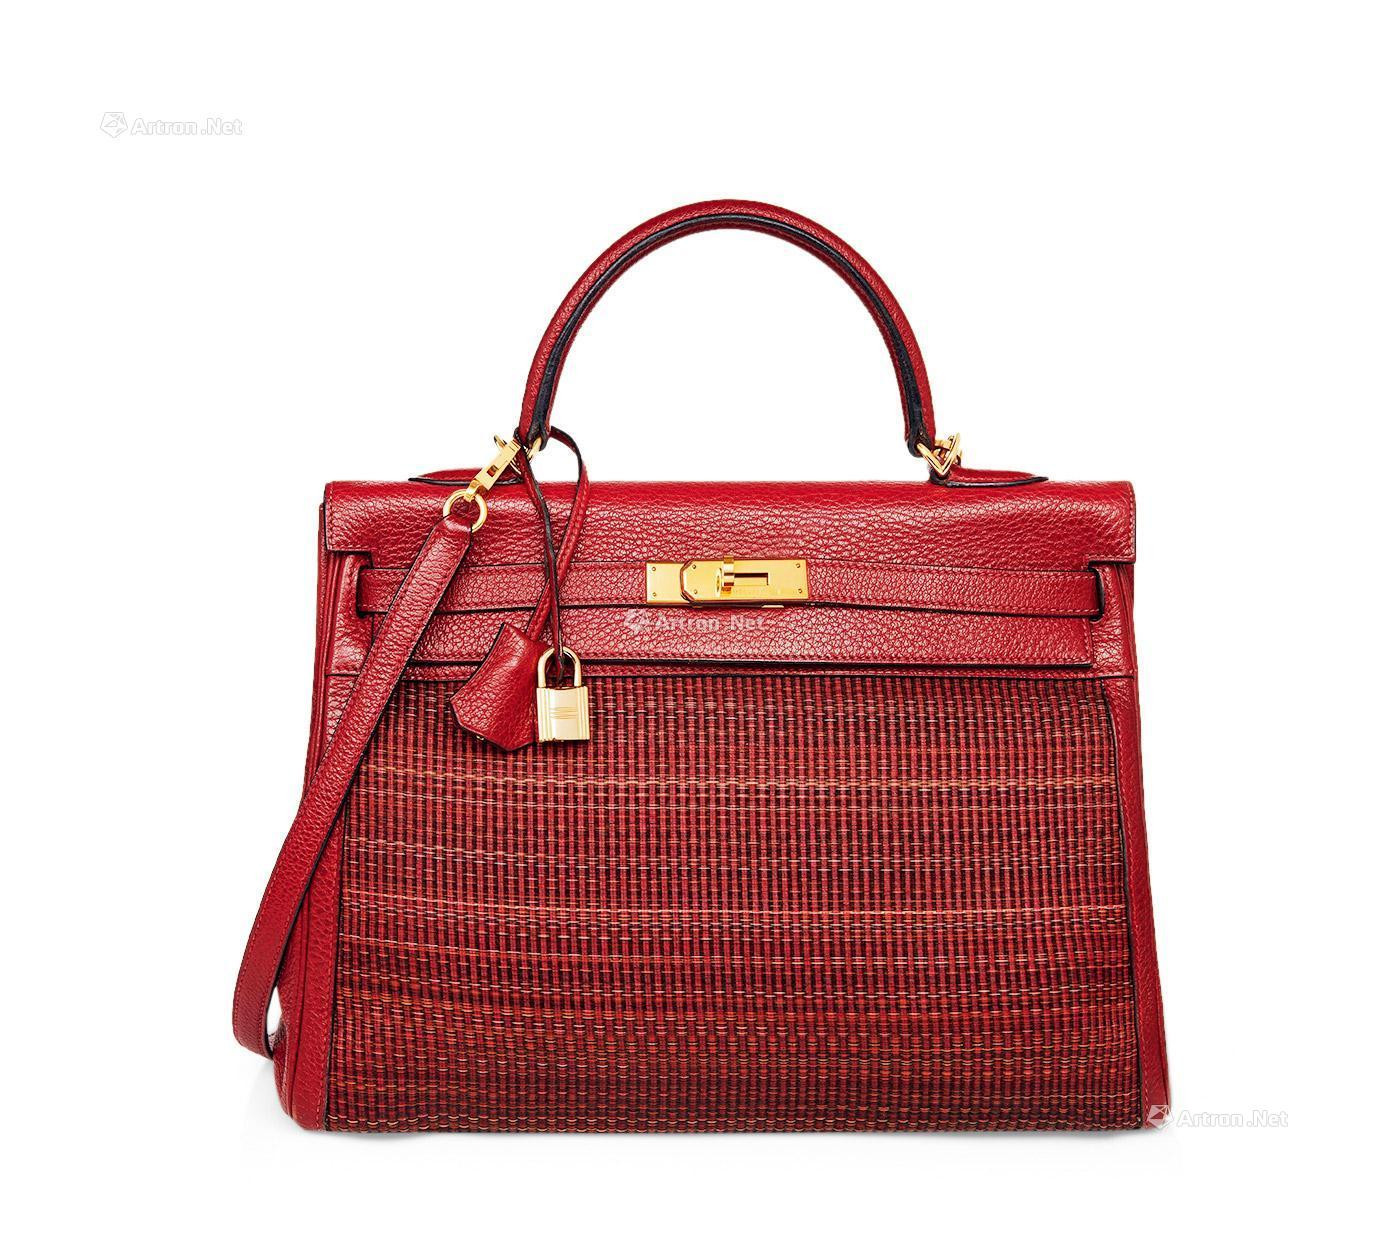 HERMES 2002　A RED LEATHER AND CRINOLINE KELLY 35 WITH PALLADIUM HARDWARE